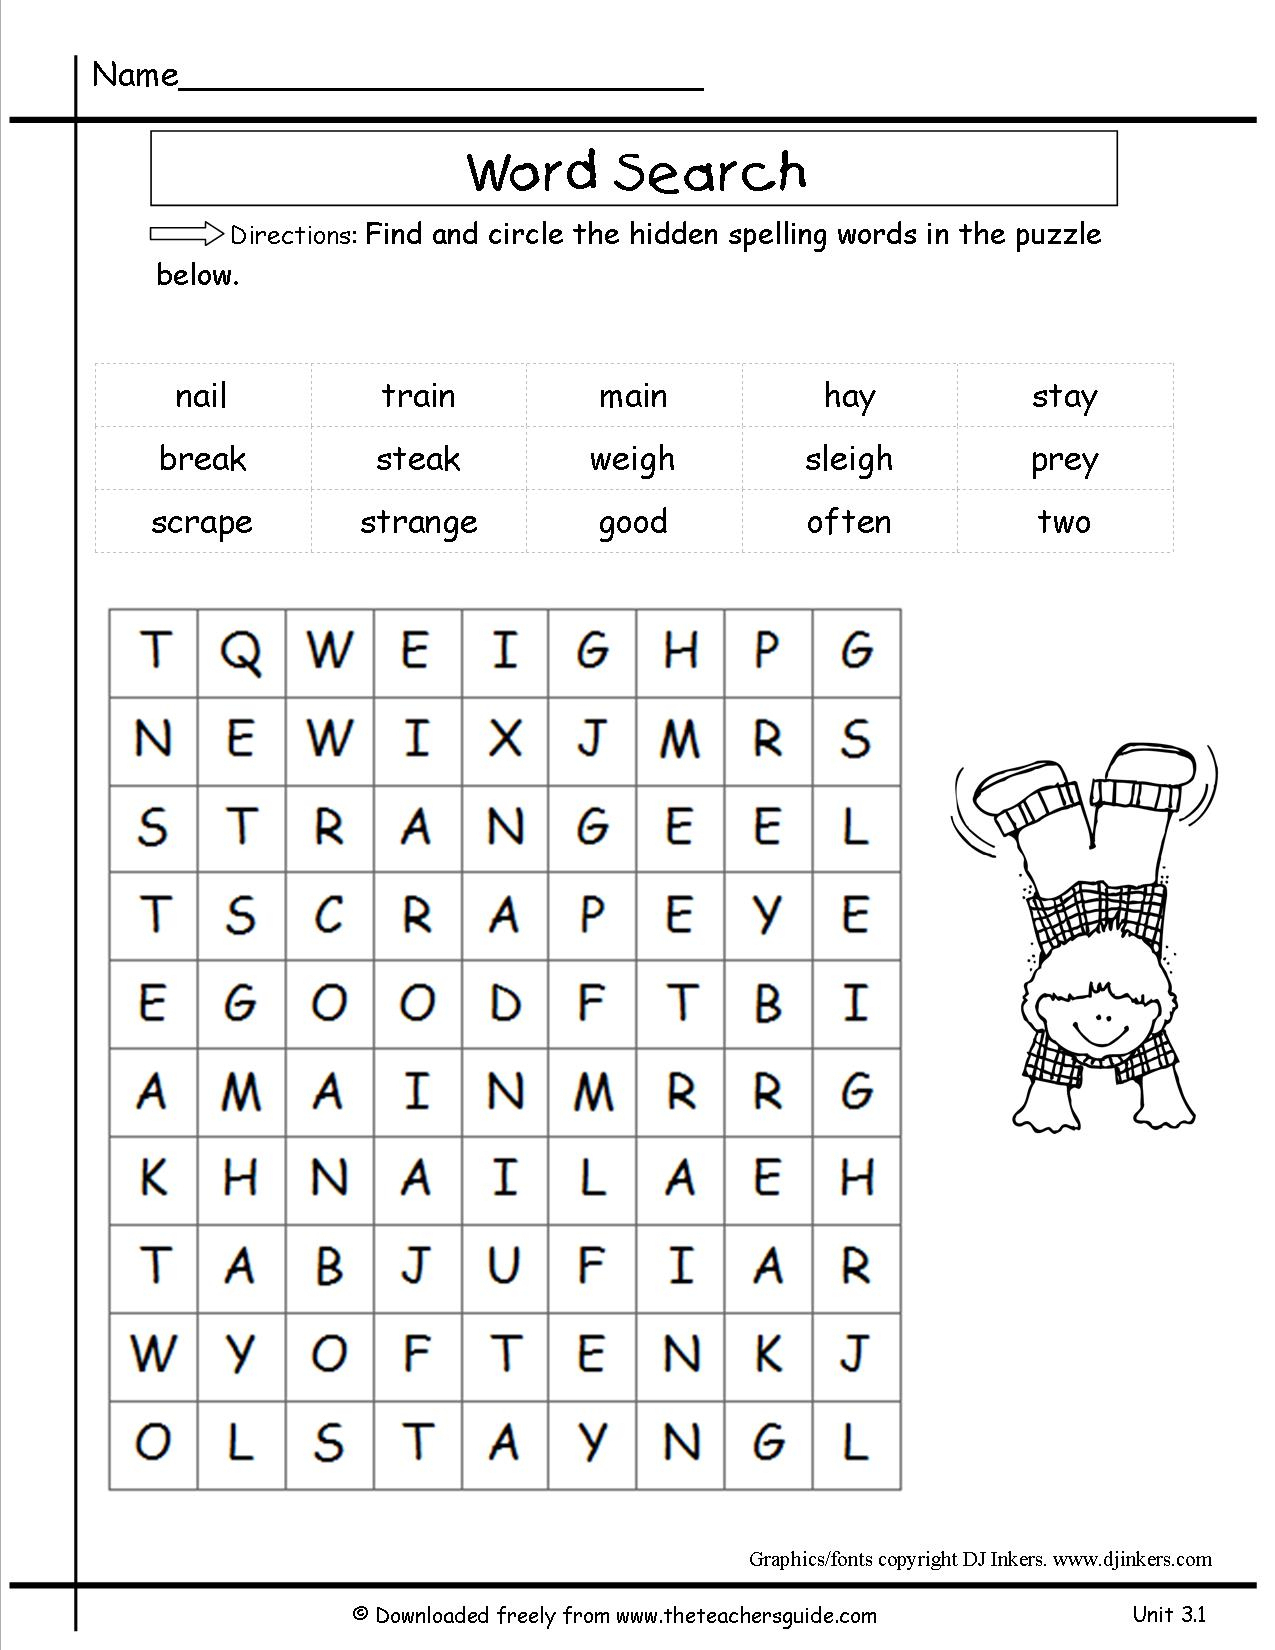 printable-crossword-puzzles-for-2nd-graders-printable-crossword